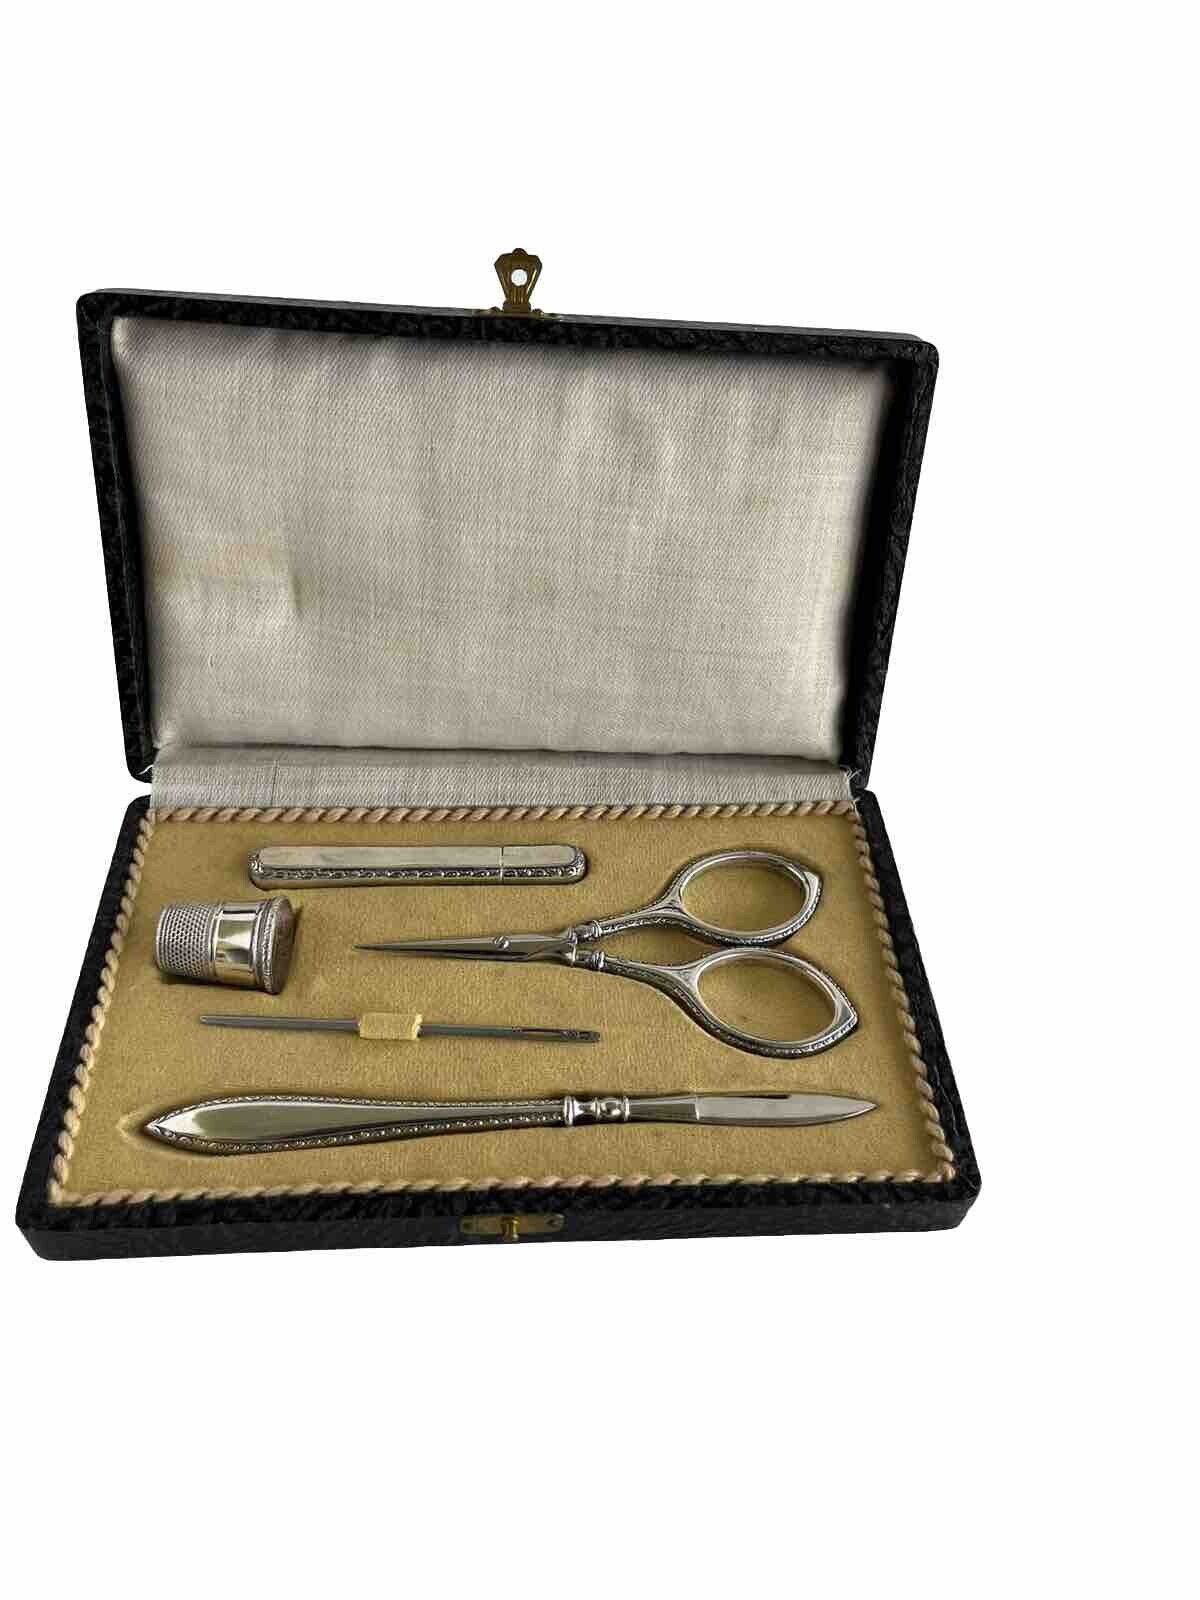 Vintage Victorian Silver Travel Sewing Set Scissors Thimble Needle Case Boxed